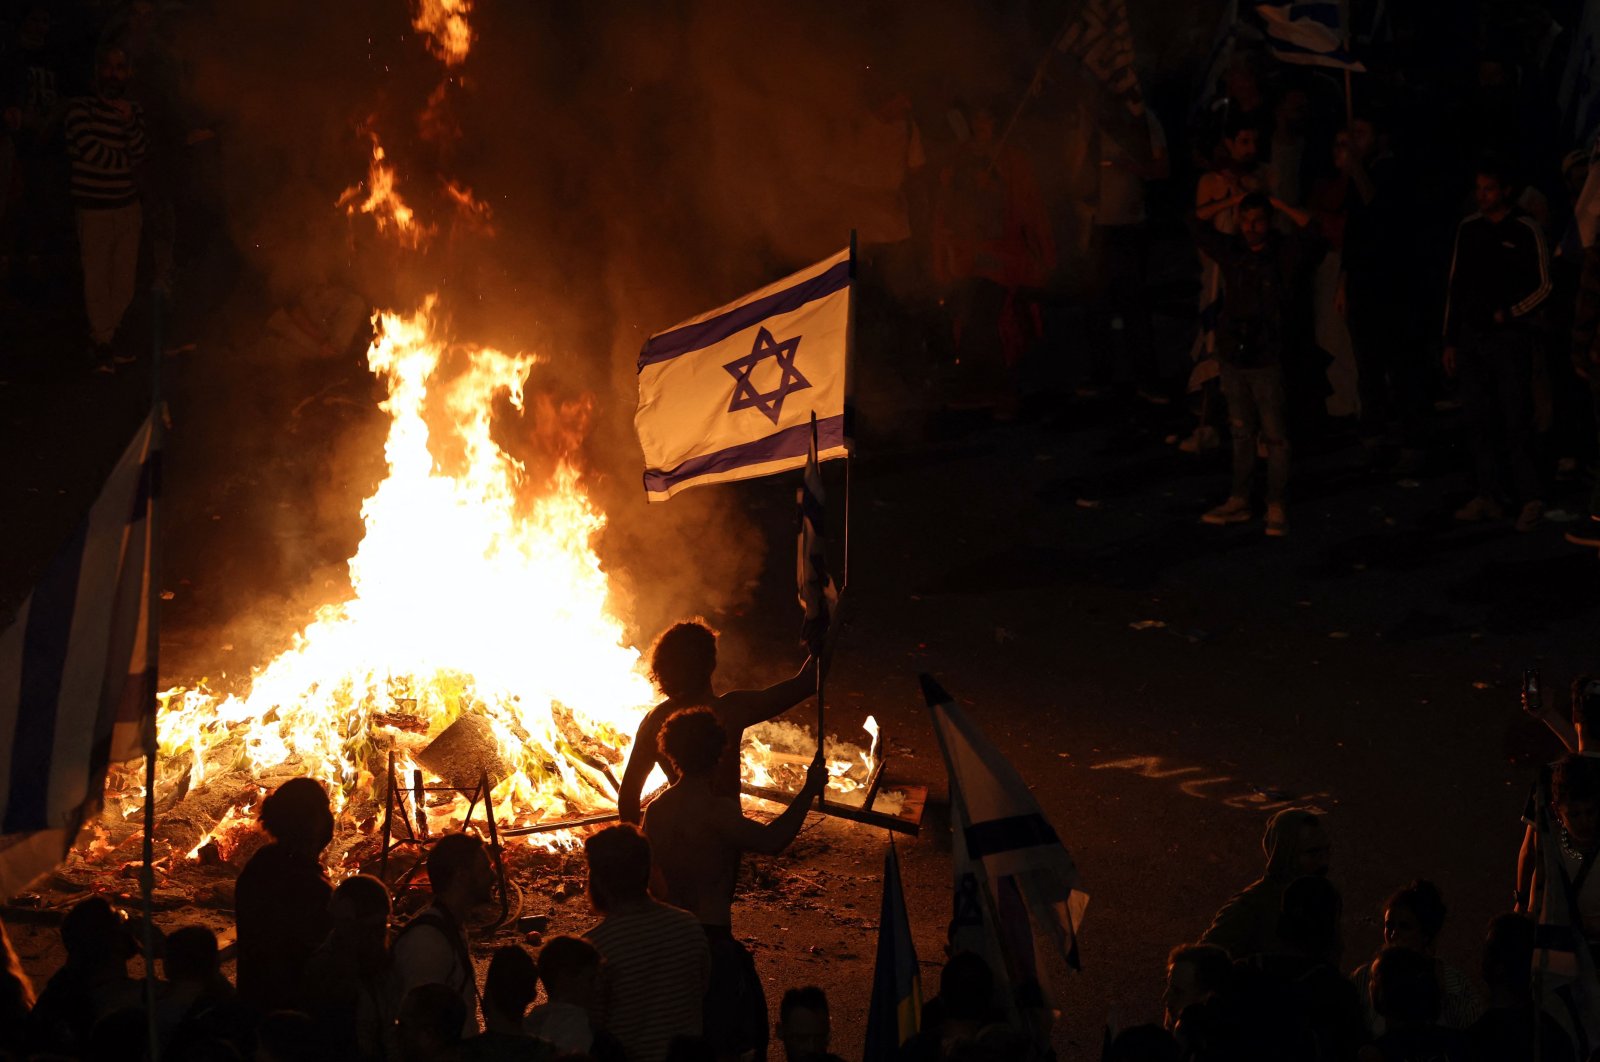 Protesters hold an Israeli flag as they gather around a bonfire during an anti-government rally, Tel Aviv, Israel, March 27, 2023. (AFP Photo)